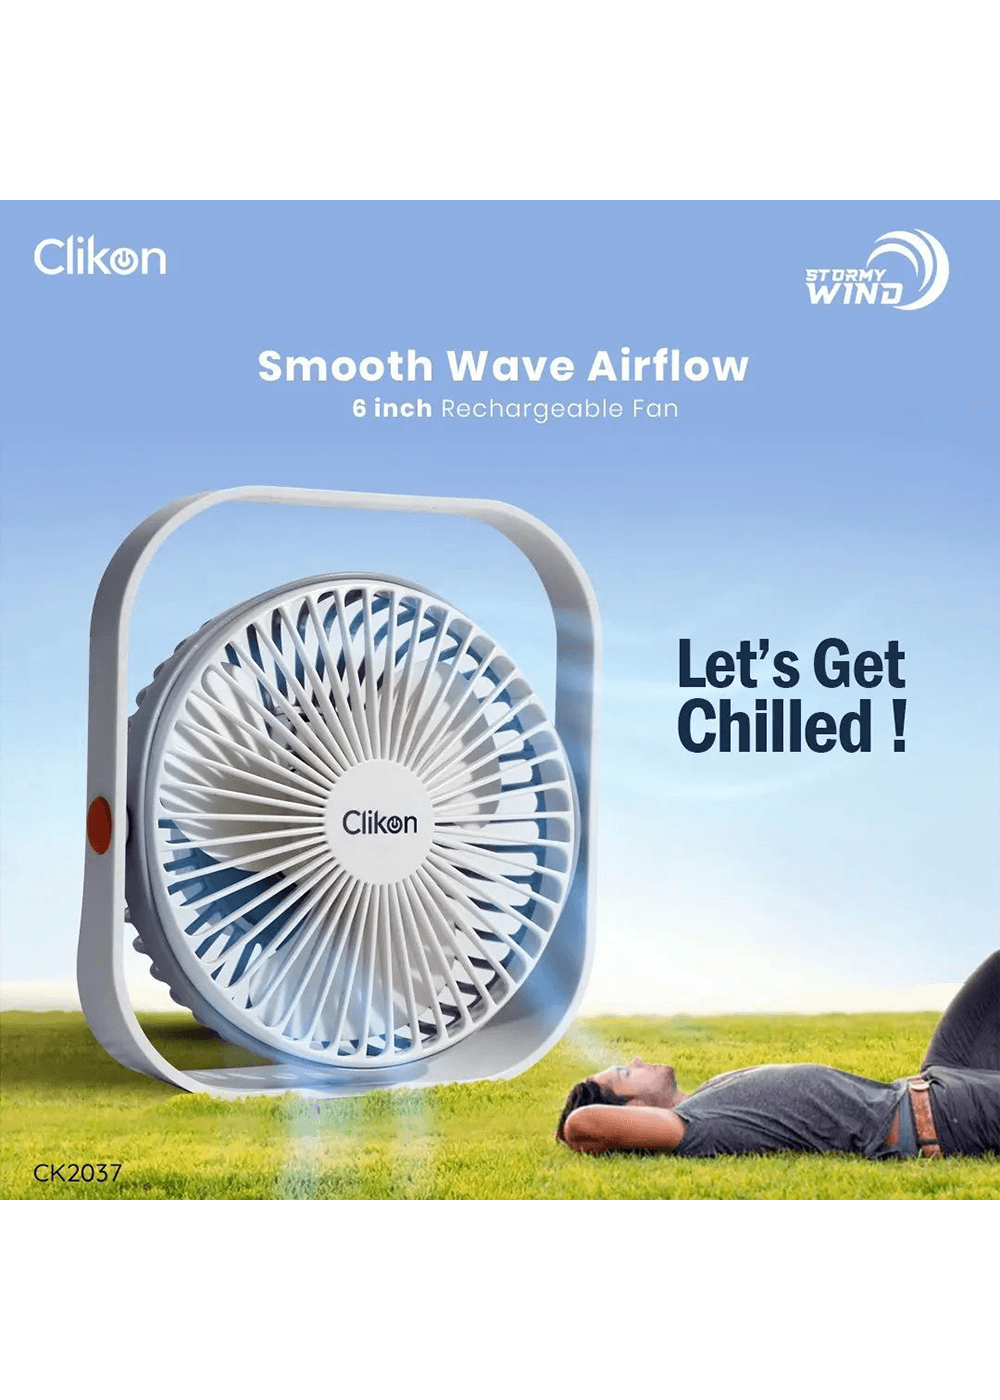 Buy ikon rechargeable fan Online in Zimbabwe at Low Prices at